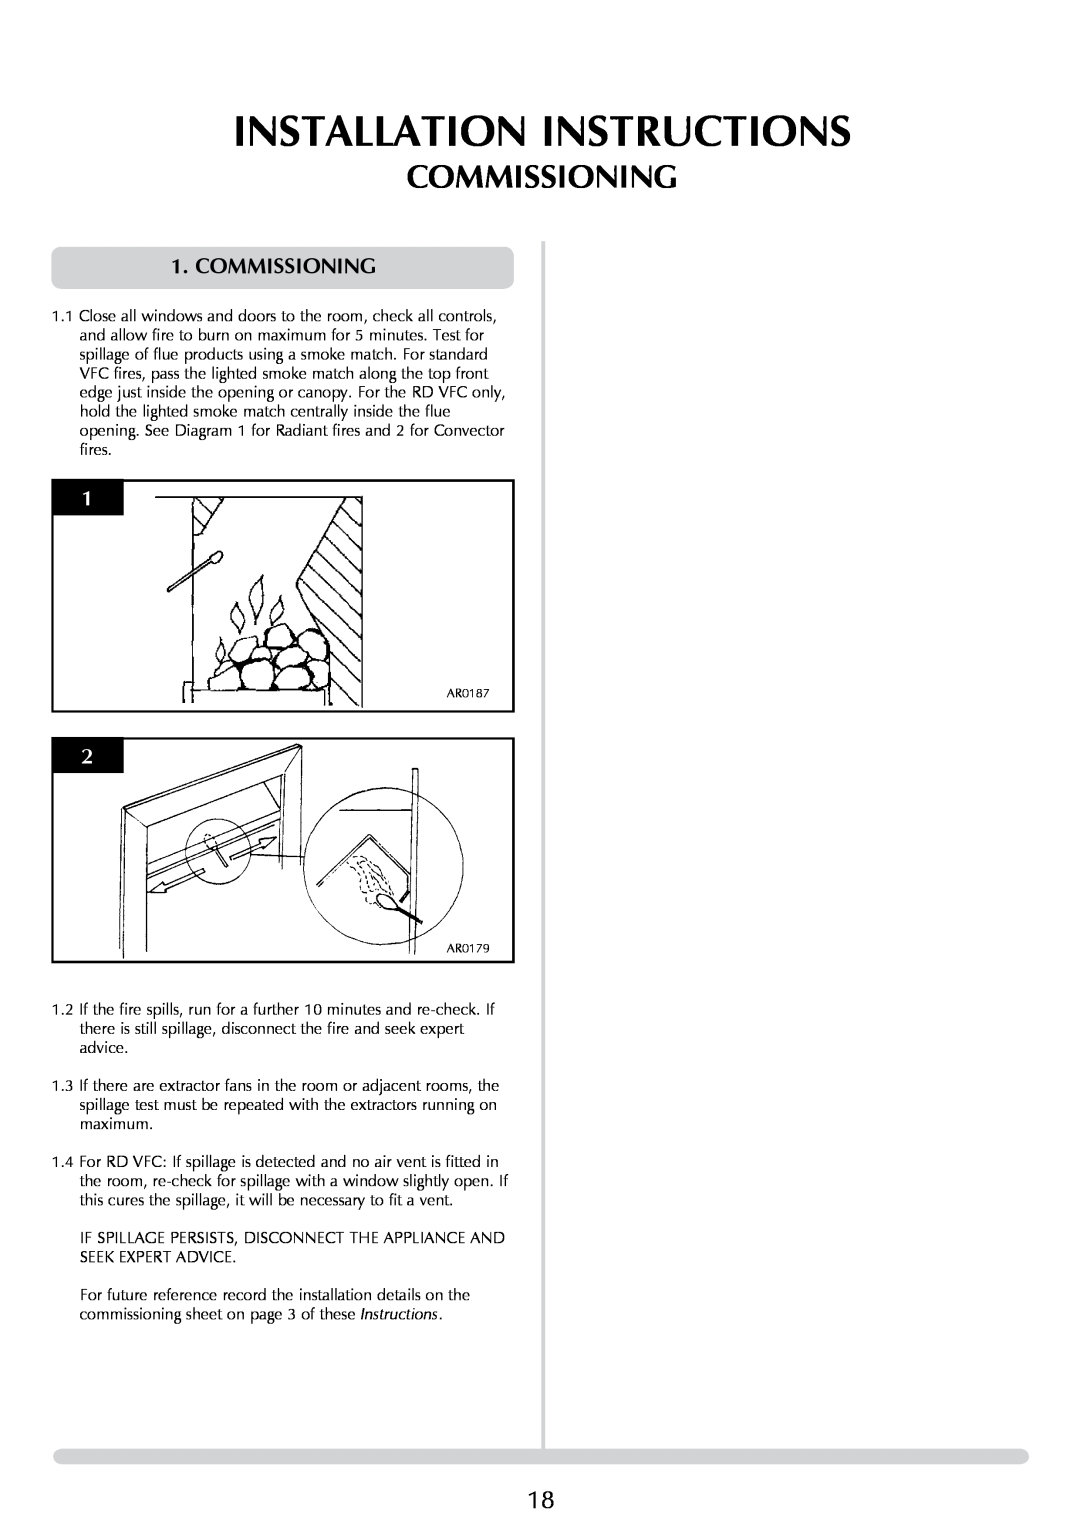 Stovax 8455 manual Commissioning, Installation Instructions 